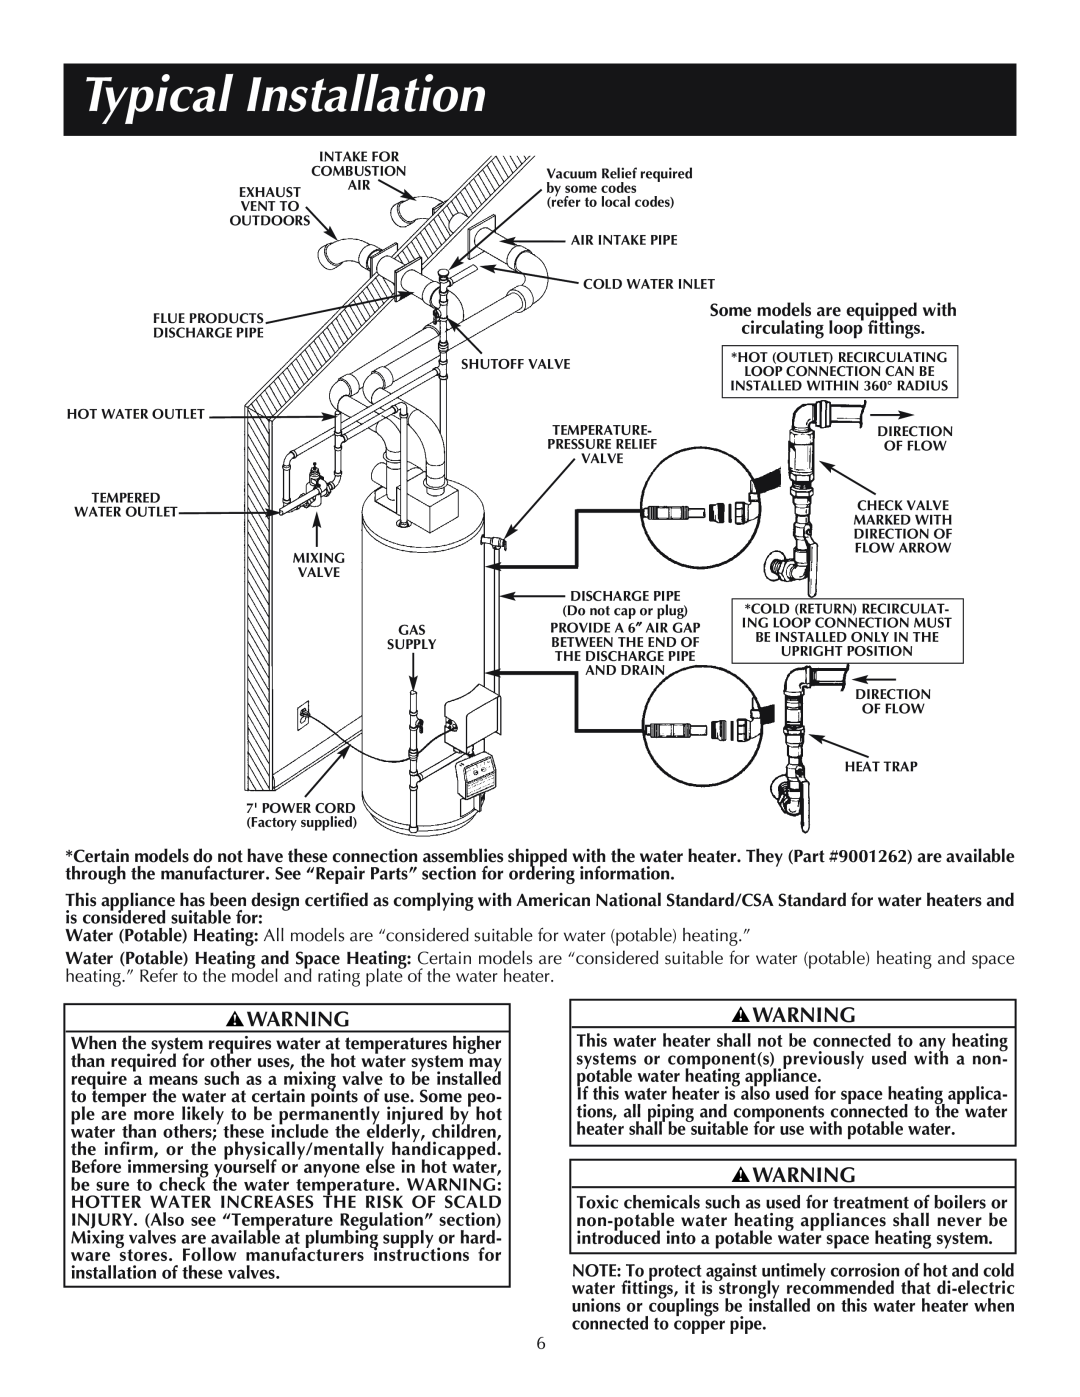 Reliance Water Heaters 606, 11-03, 184333-001 instruction manual Typical Installation 